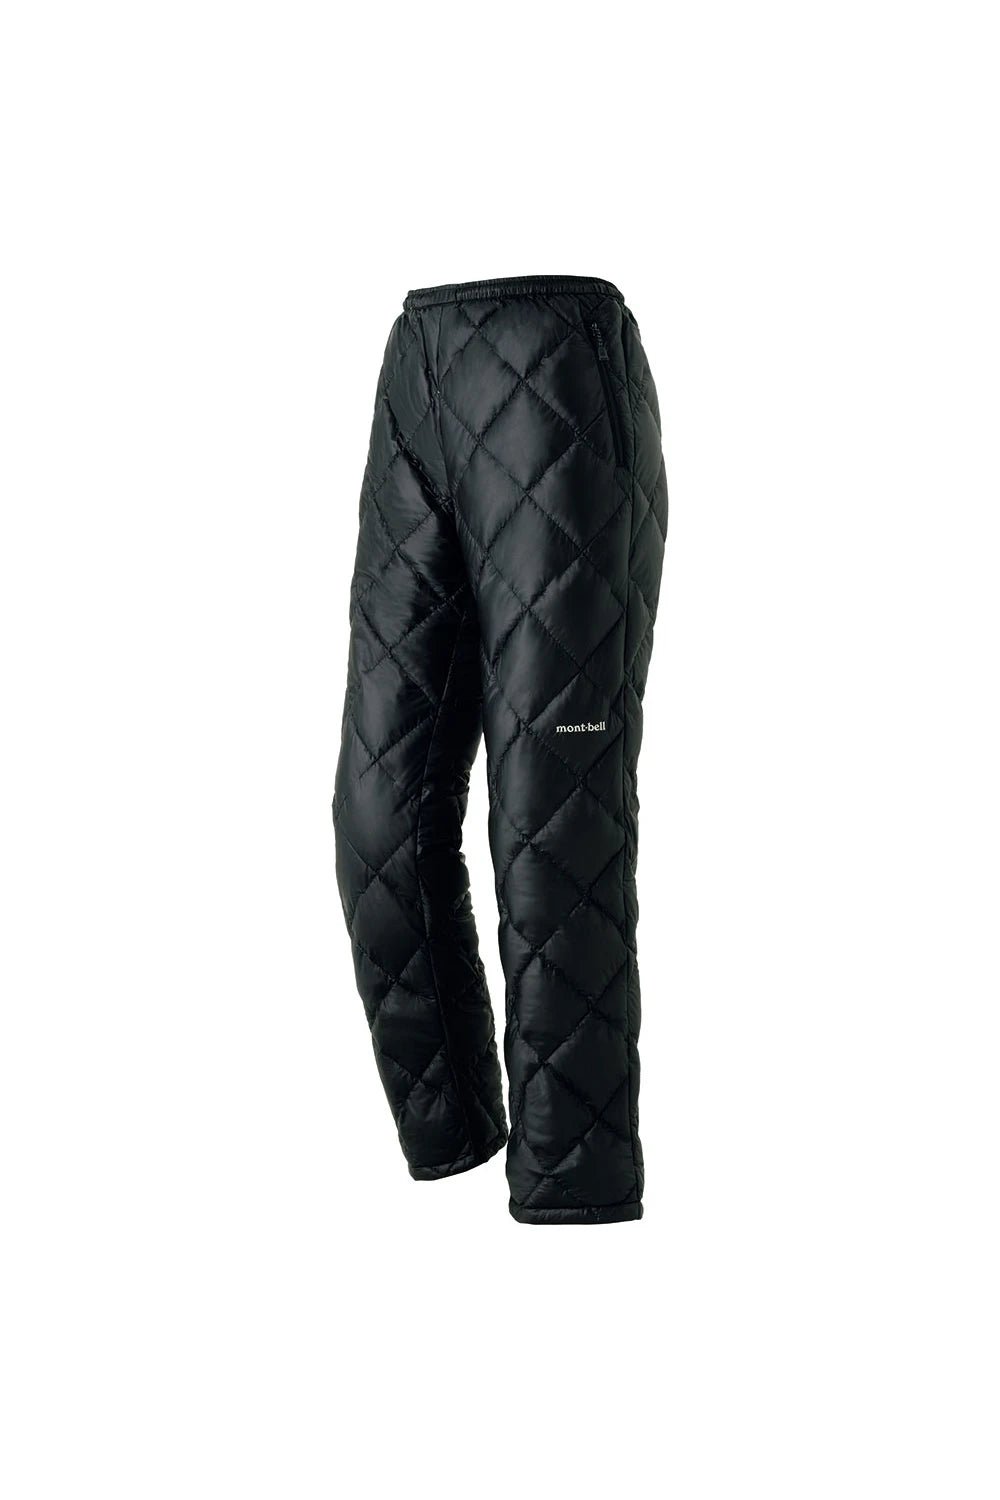 Montbell Womens Superior 800 Down Pants - Black | Coffee Outdoors